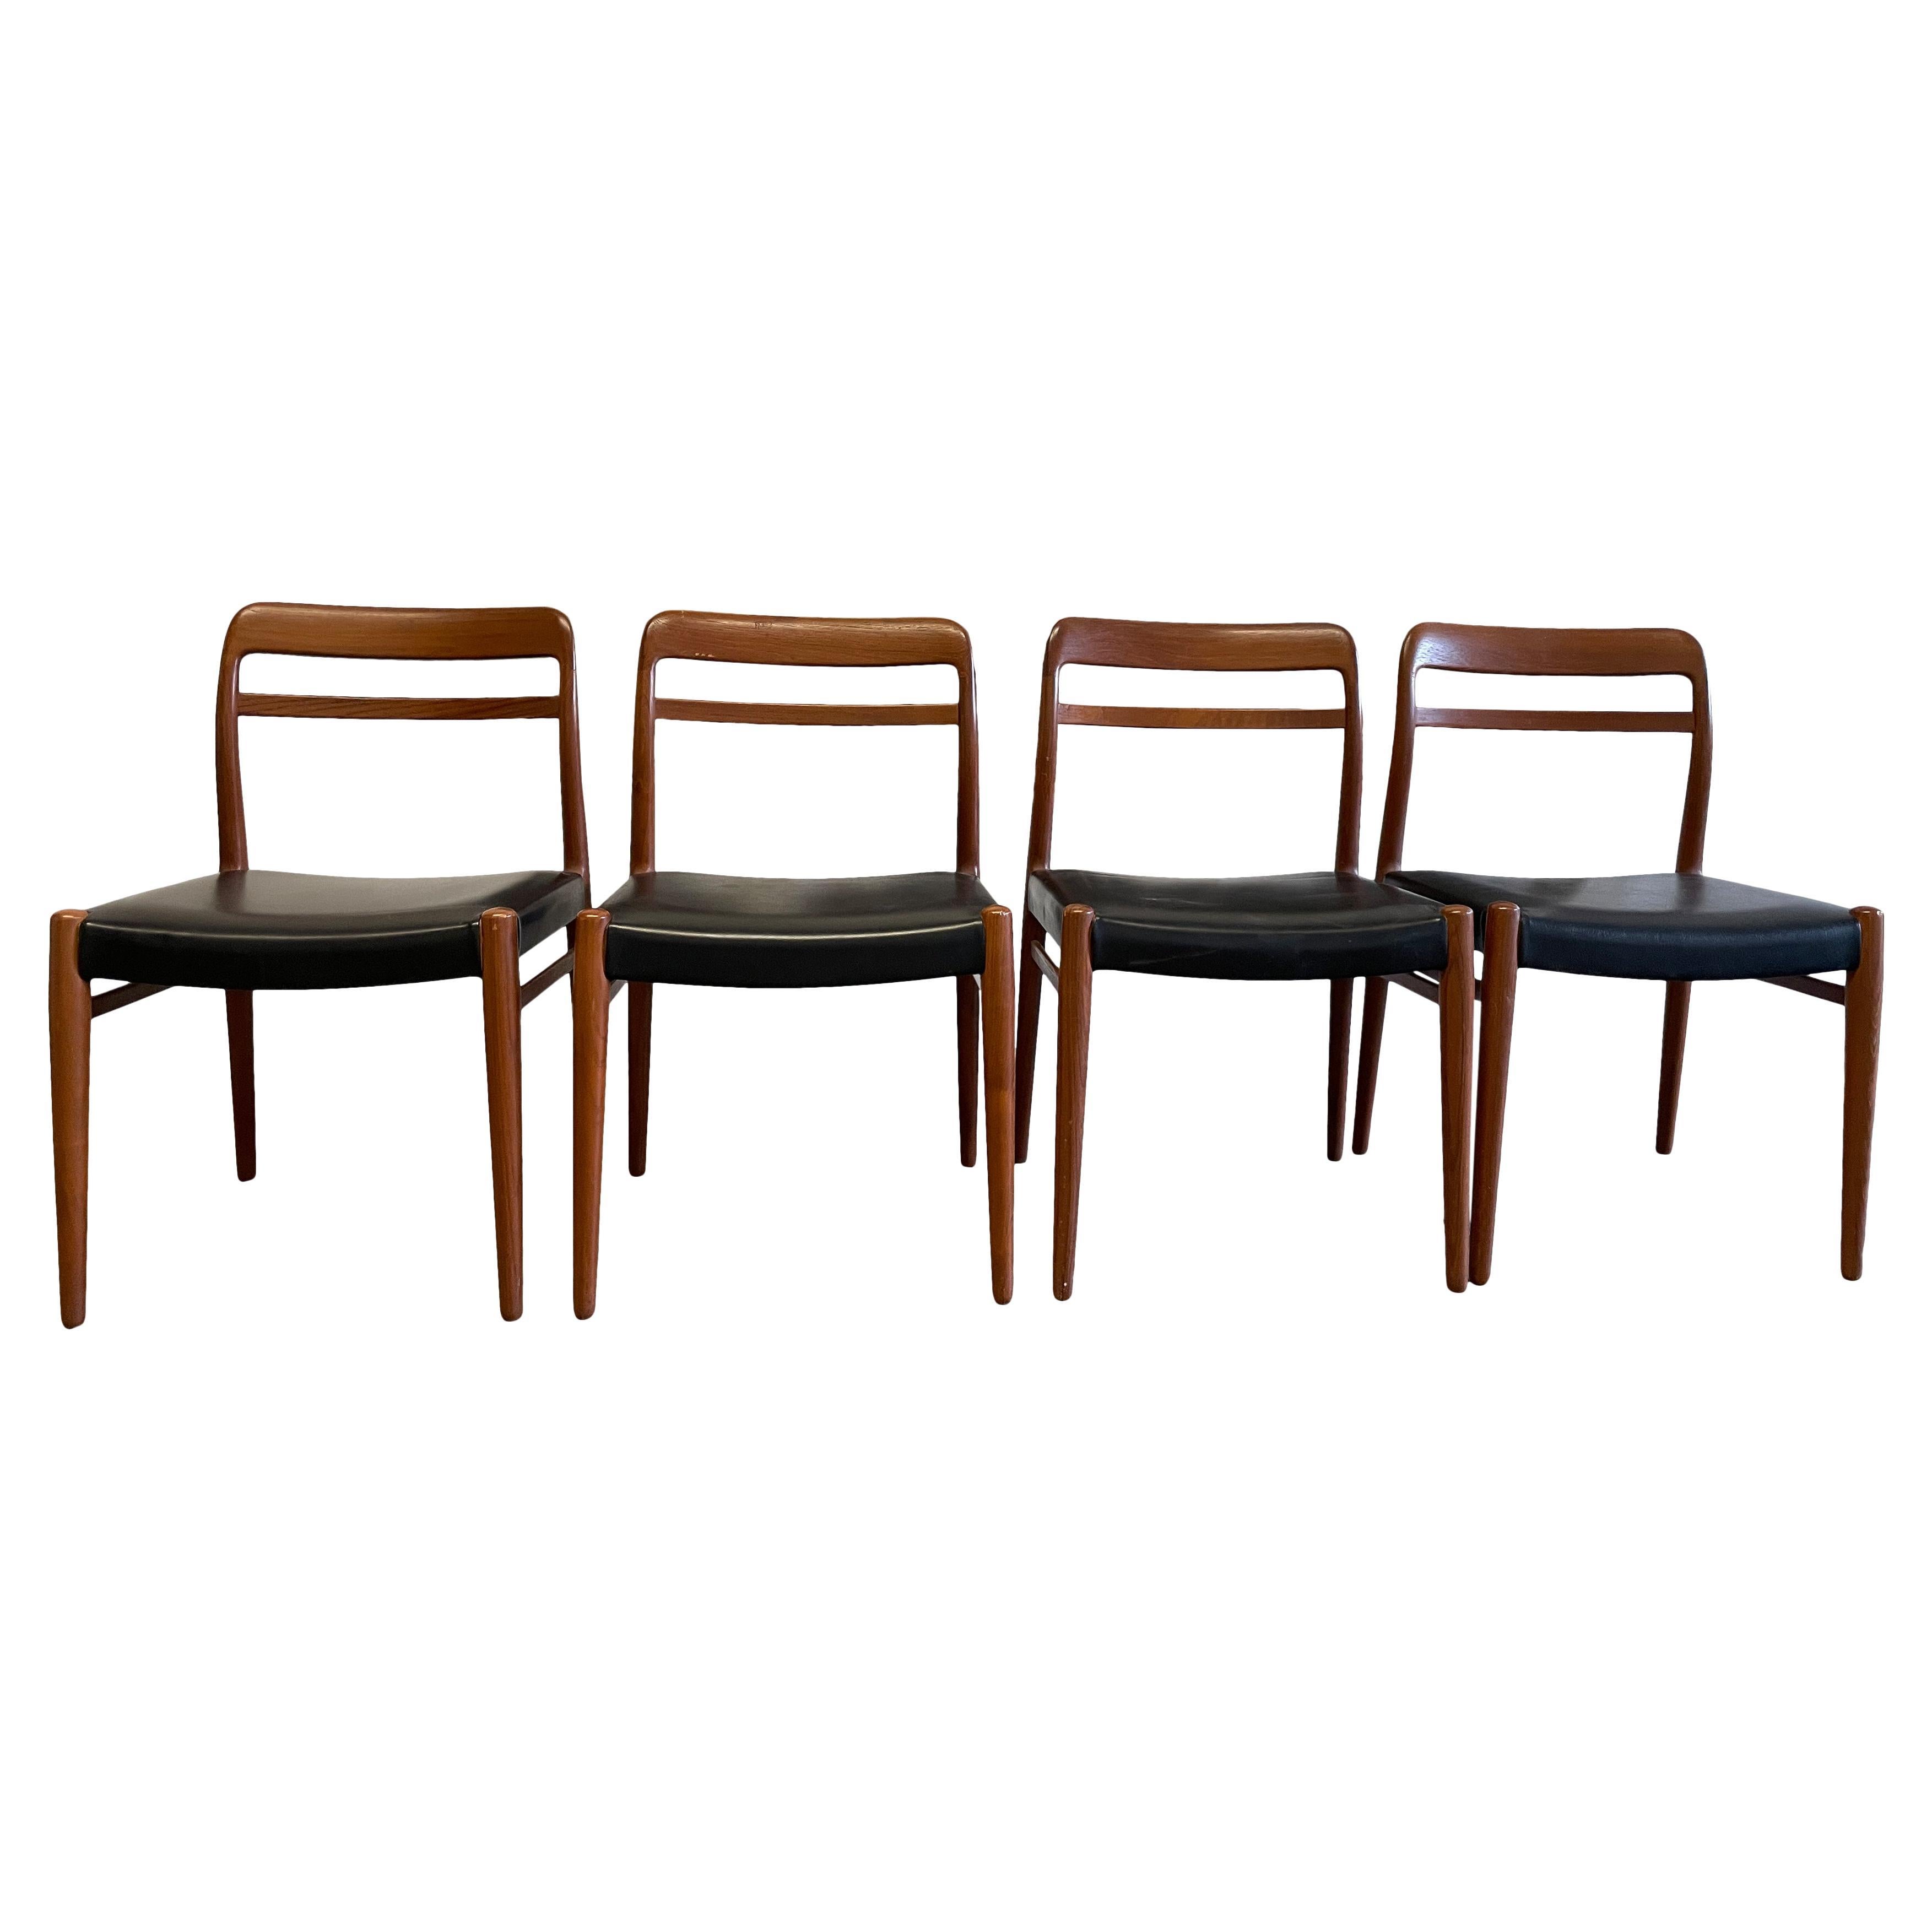 Set of 4 Mid Century Norwegian Teak Dining Chairs Curved Back